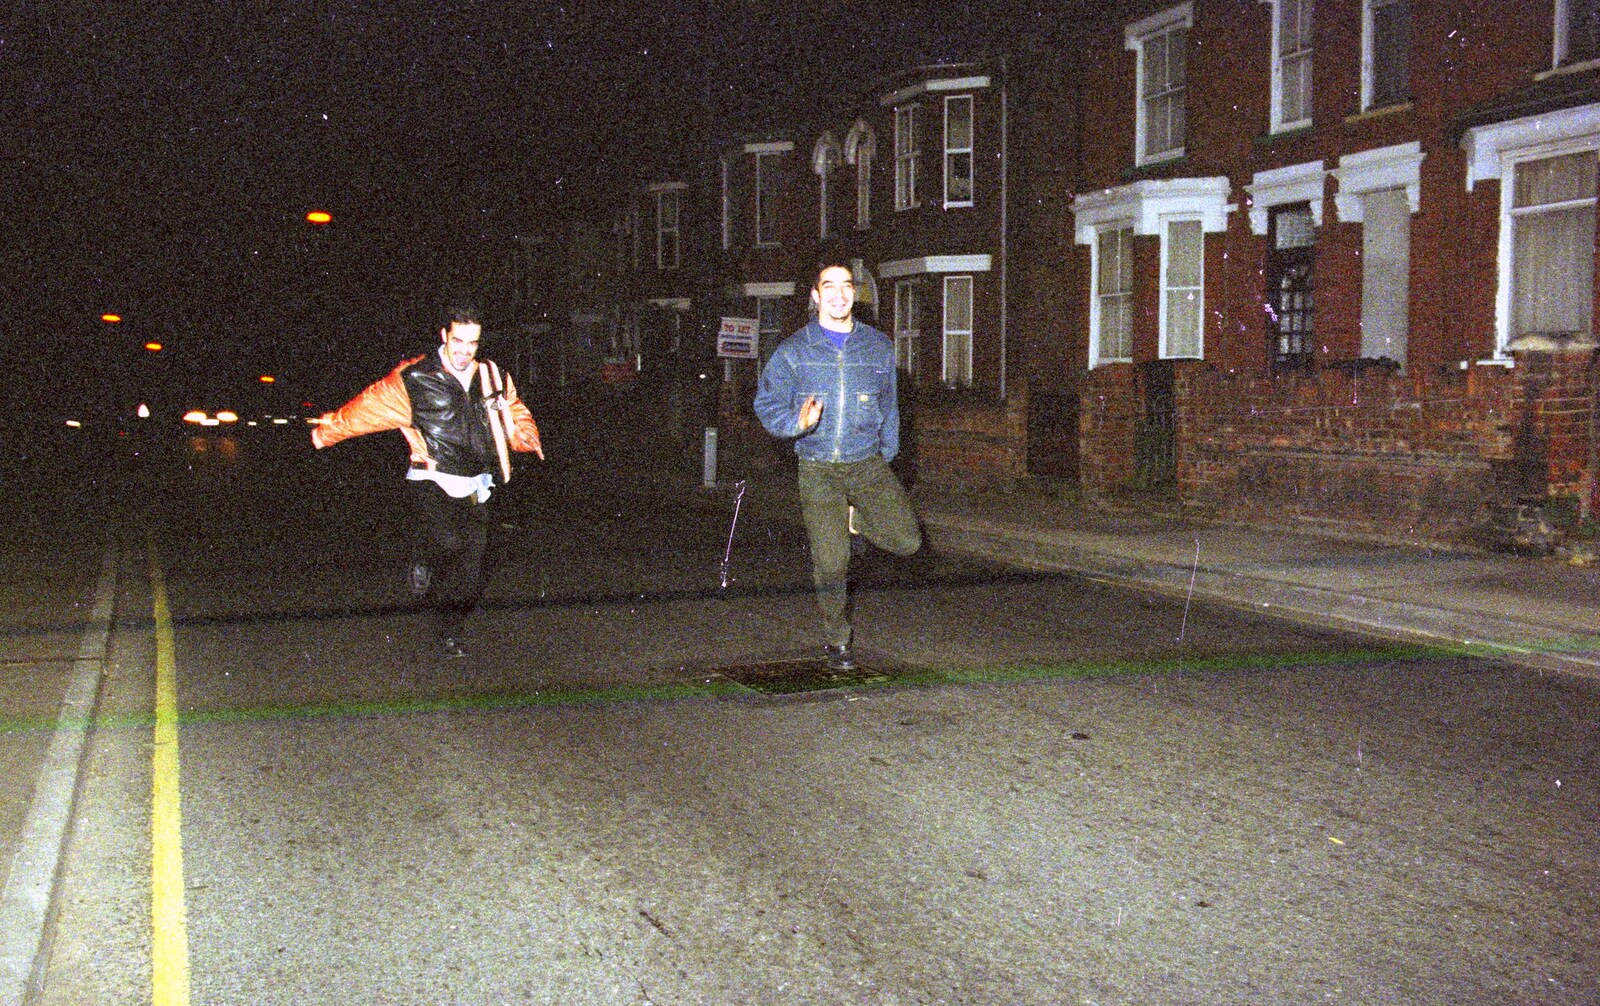 More late-night running from CISU: A Chinese Restaurant and SCC Sports Day, Ipswich and Norwich - 1st May 1997